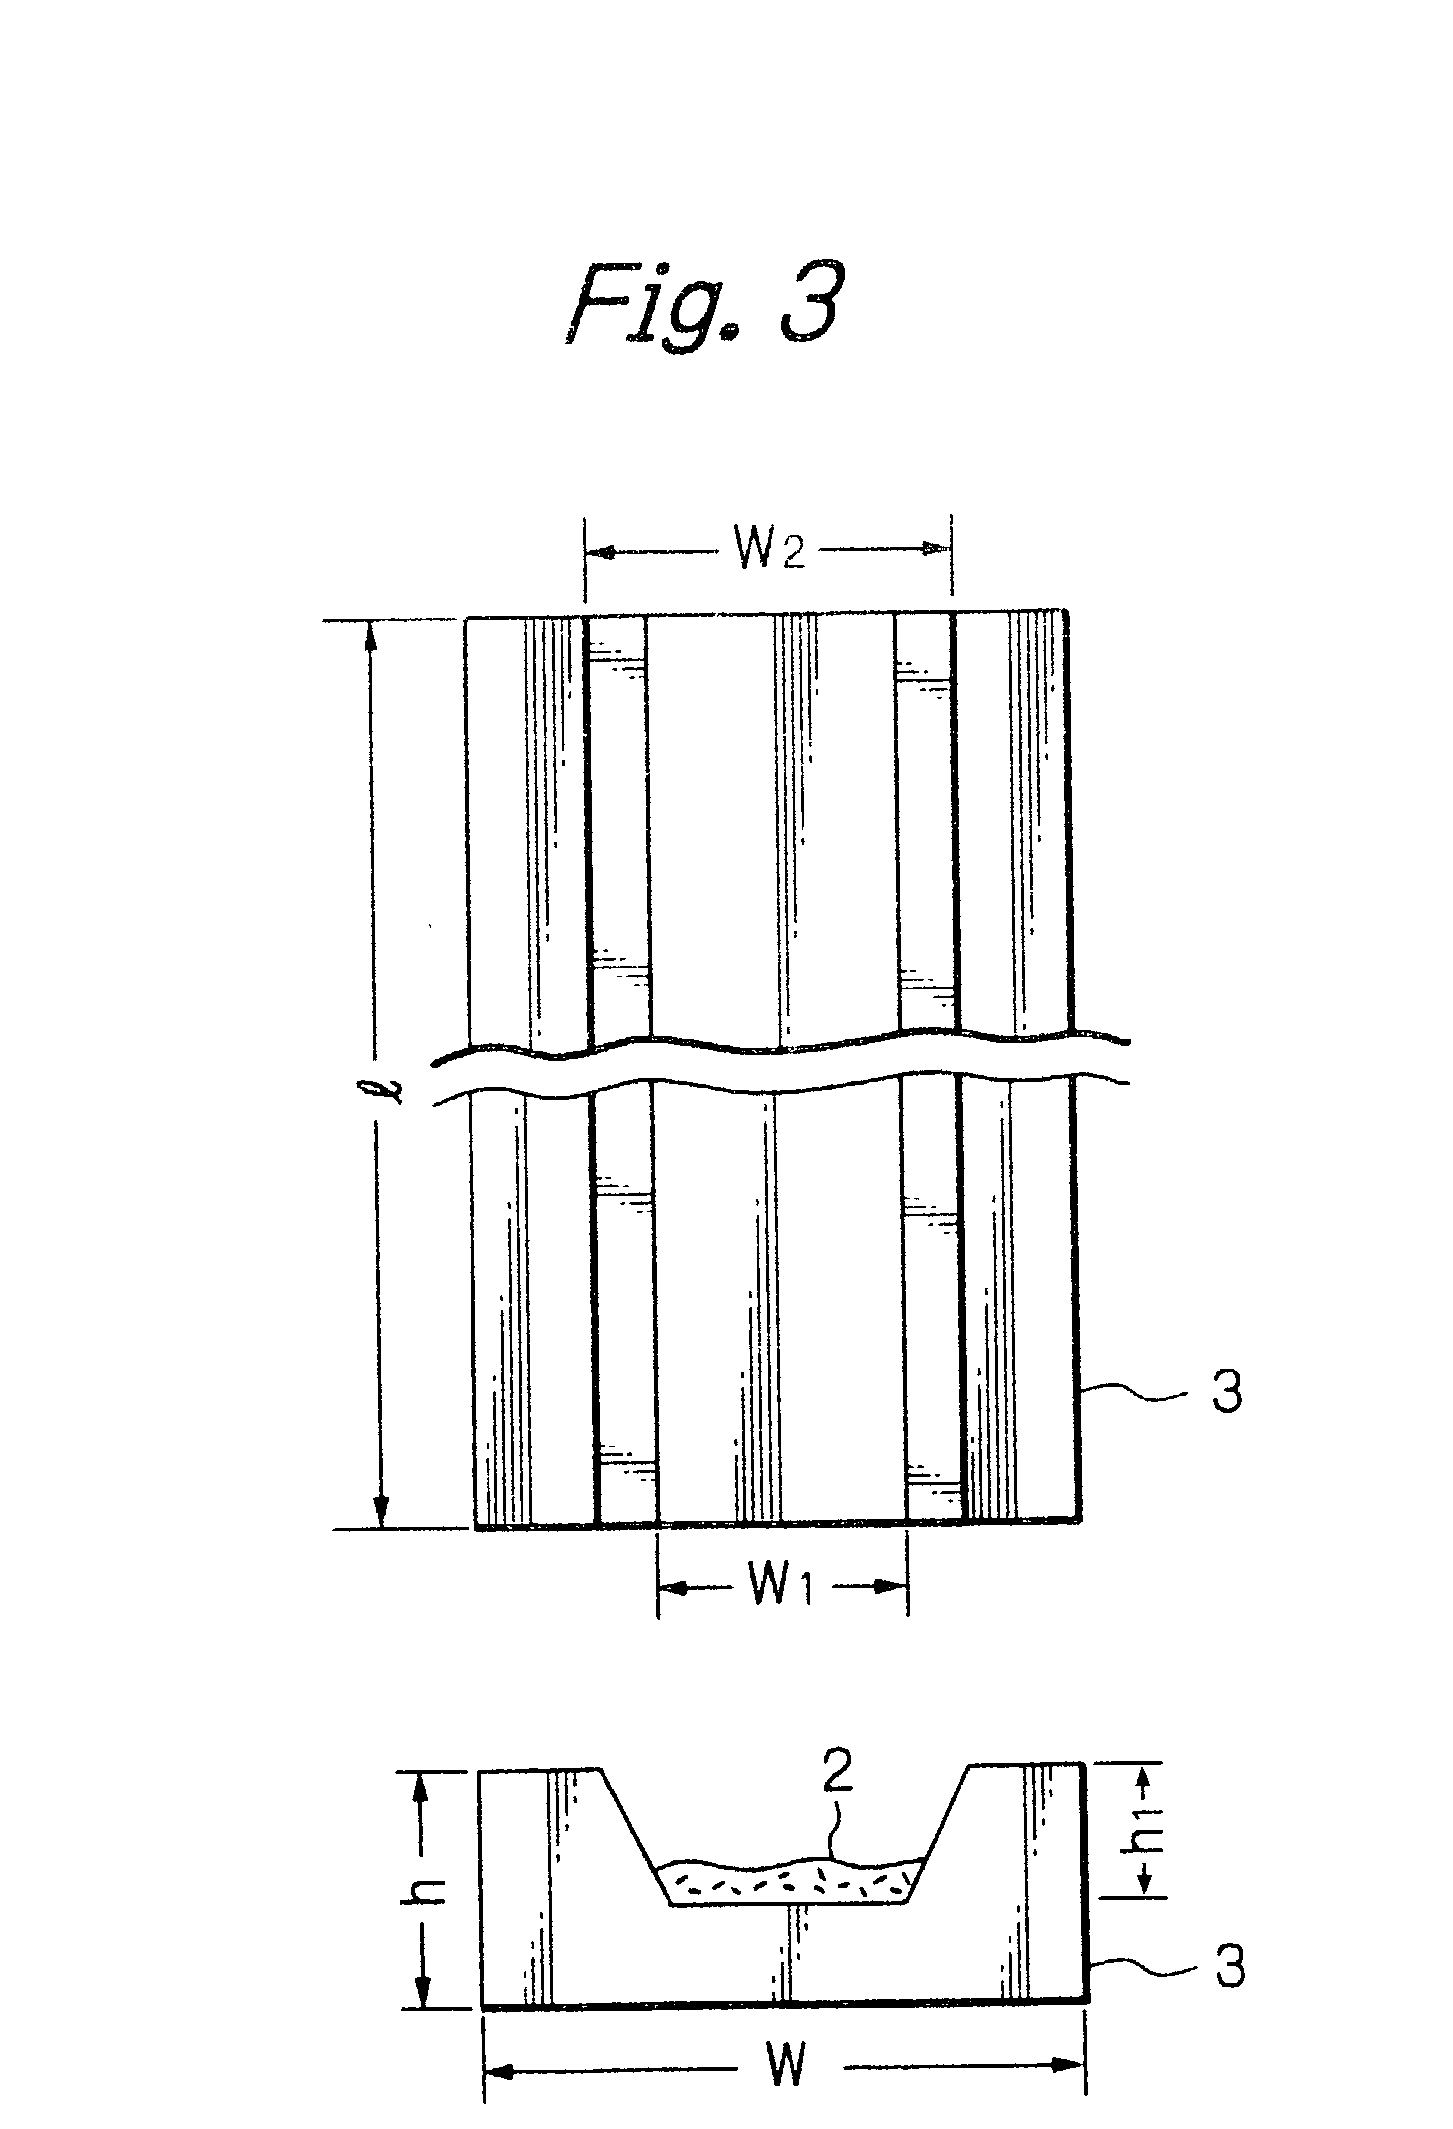 Refractory material for casting a rare-earth alloy and its production method as well as method for casting the rare-earth alloys